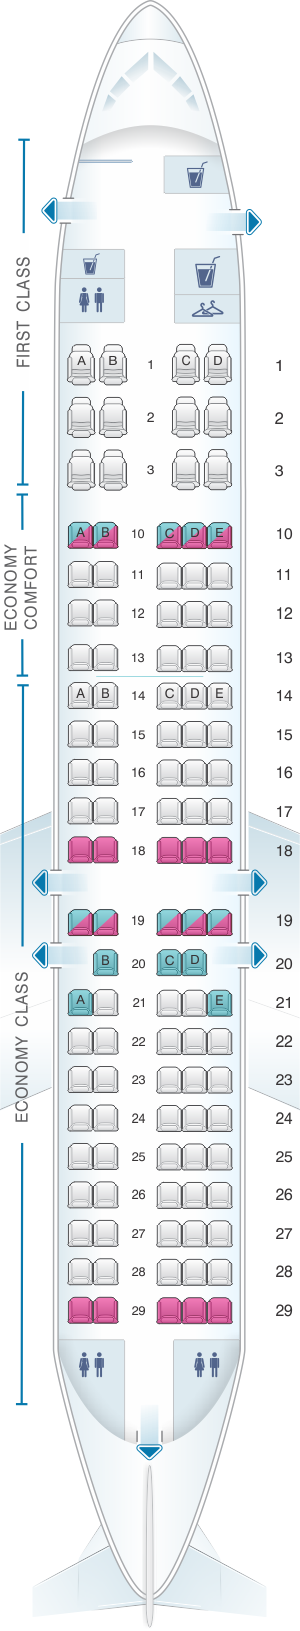 delta airlines seat assignment fees